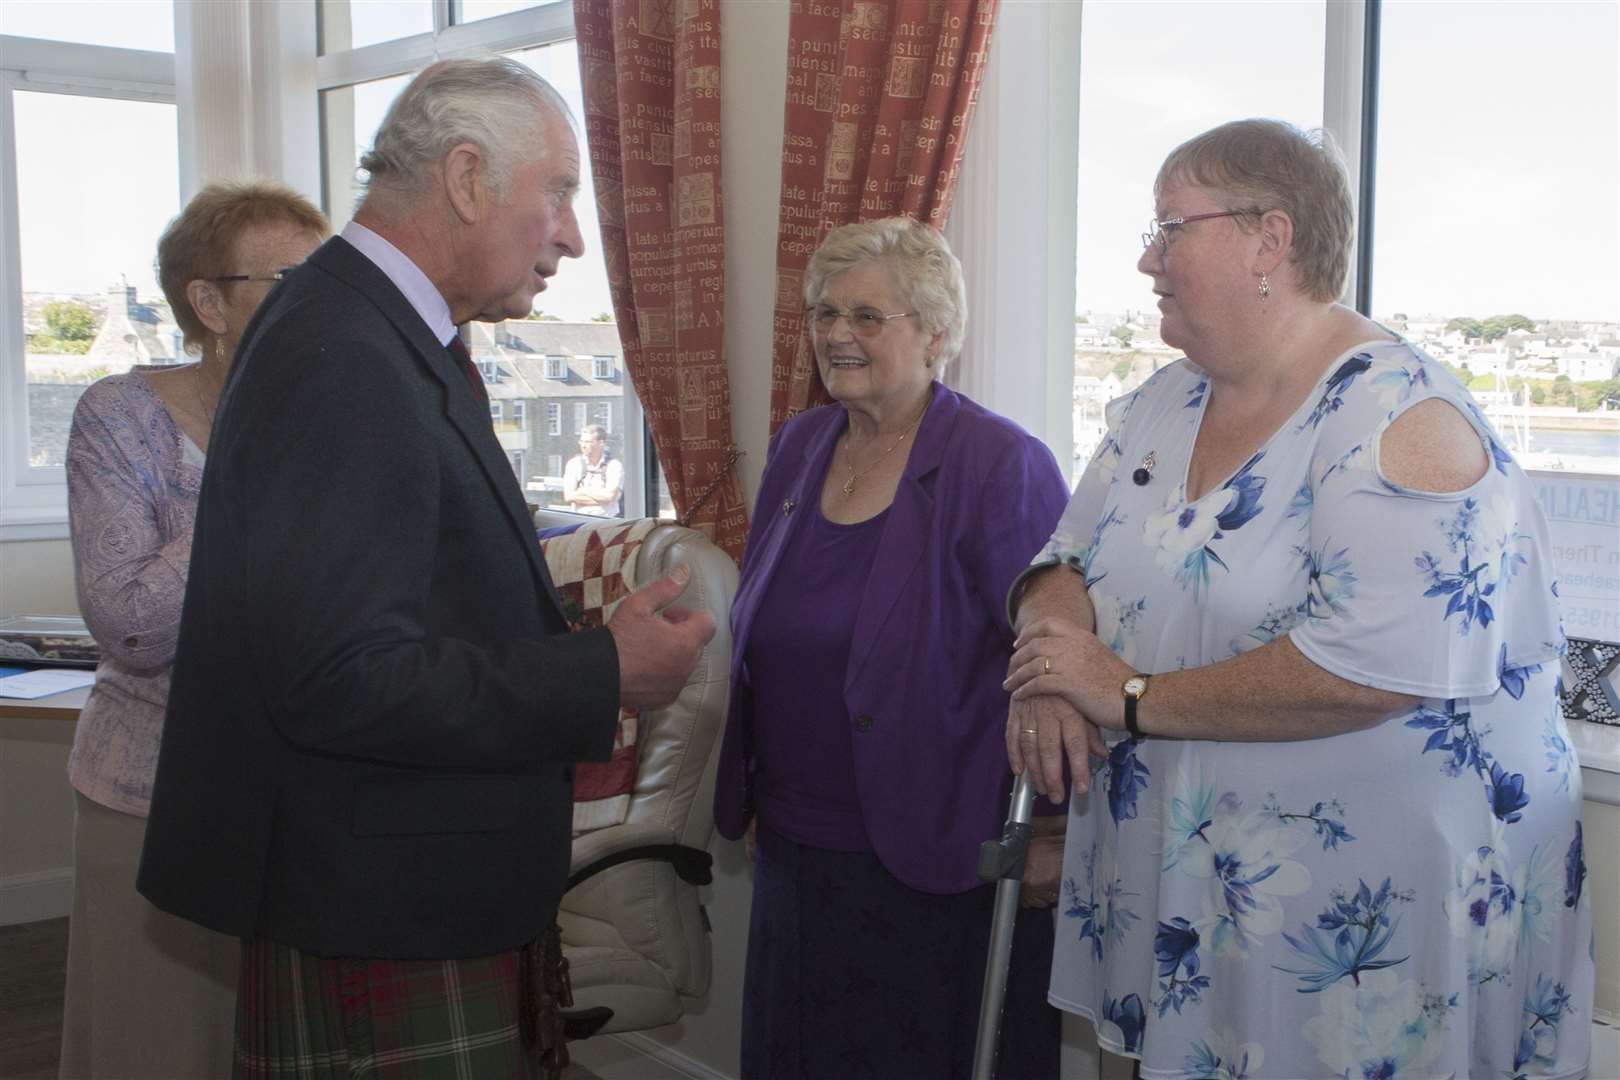 The Duke of Rothesay chats with Joanna Mackay and Meg McGill inside the Healing Hub. Picture: Robert MacDonald / Northern Studios